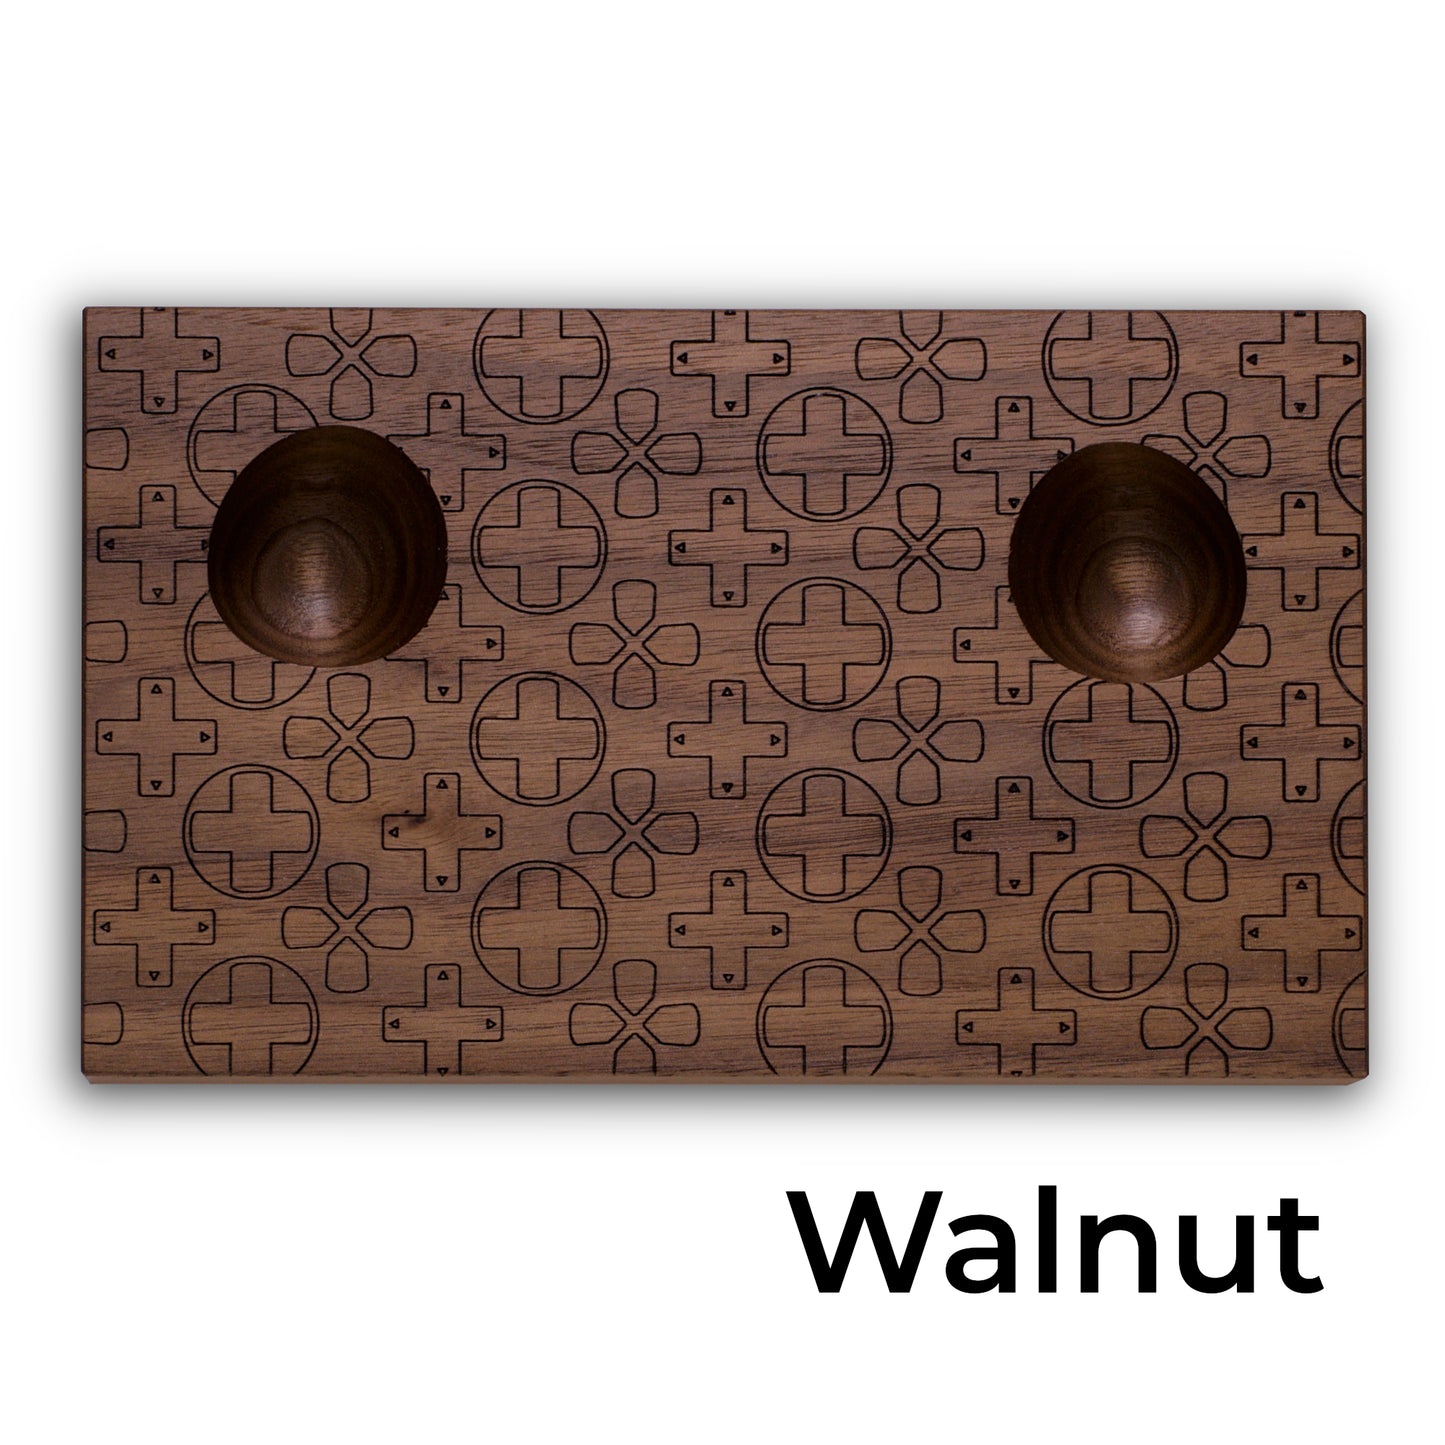 Wooden stand with d-pad design in walnut for Xbox series X|S controller